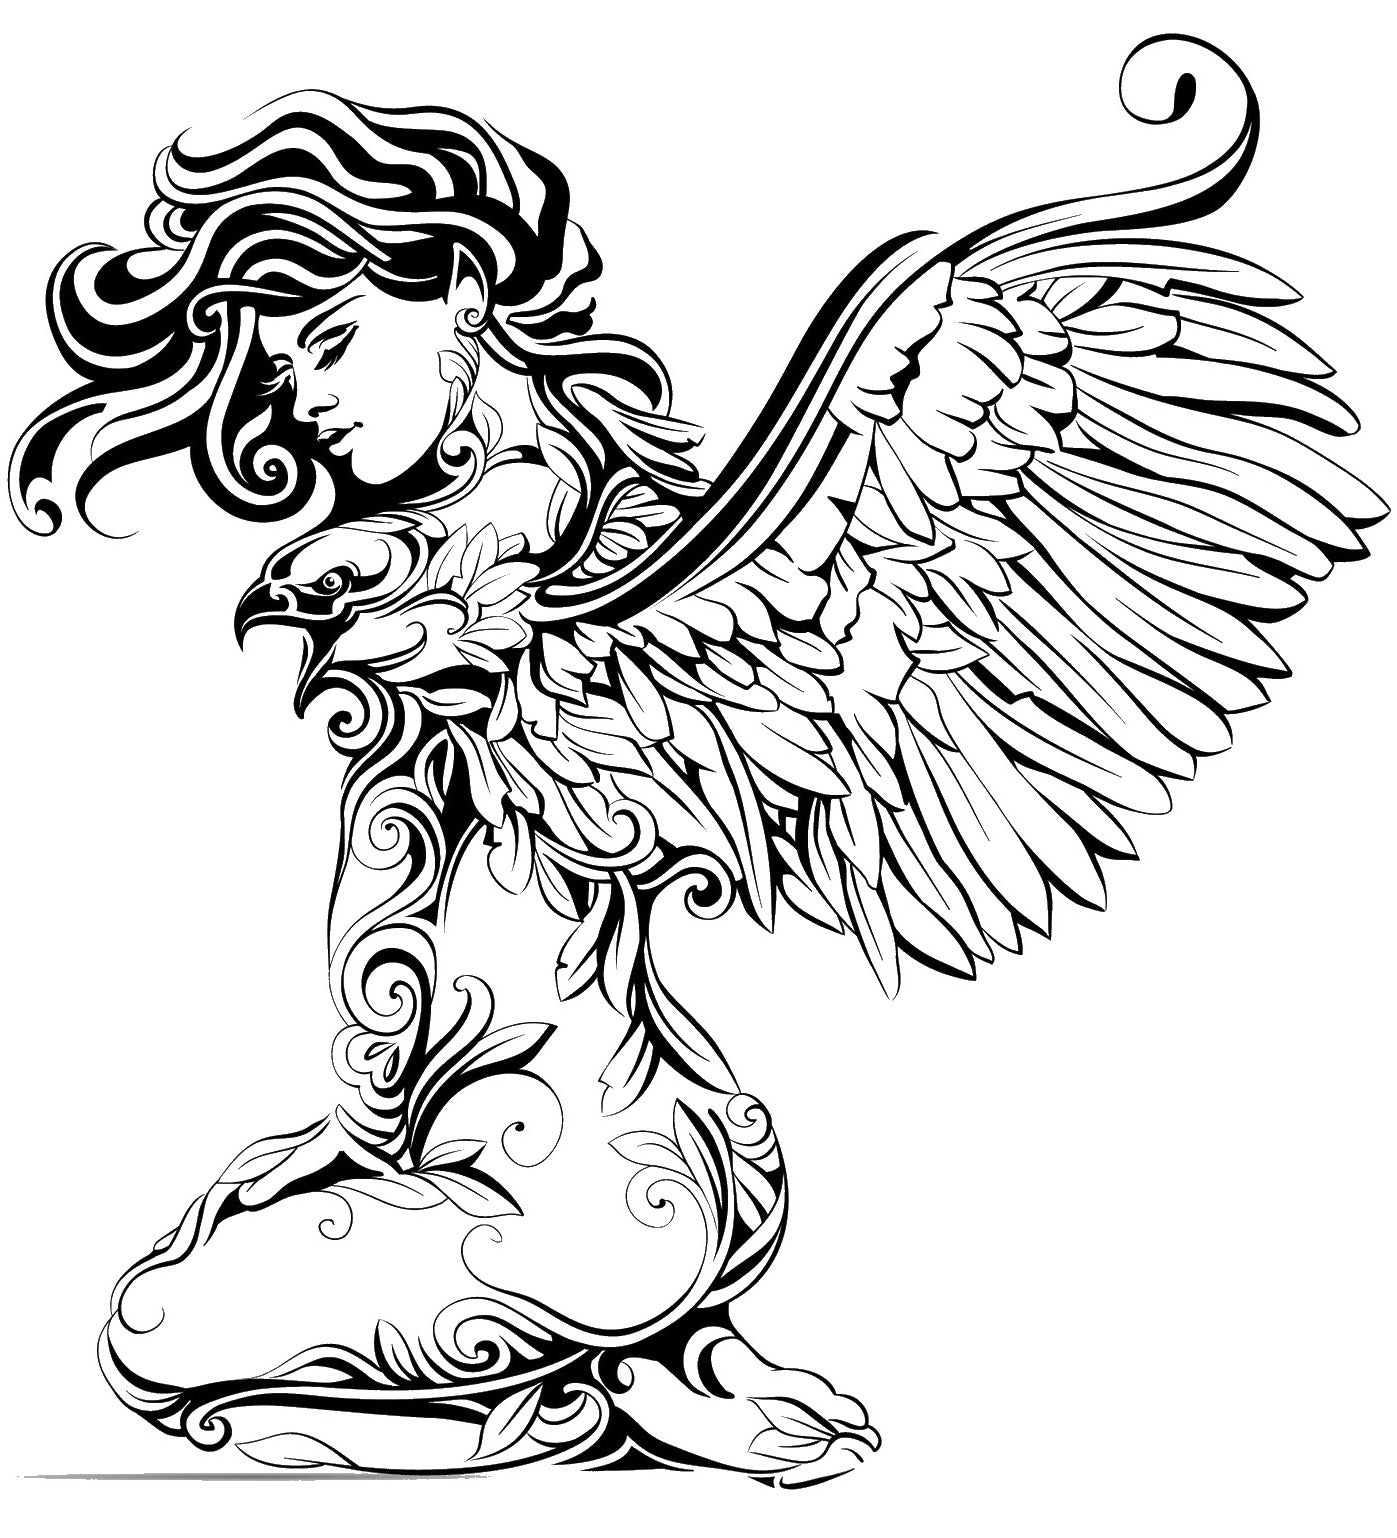 Fantasy Angels - Mystical Beautiful Divine and Demonic Women (Mild Nudity) PDF Coloring for Adults 21+